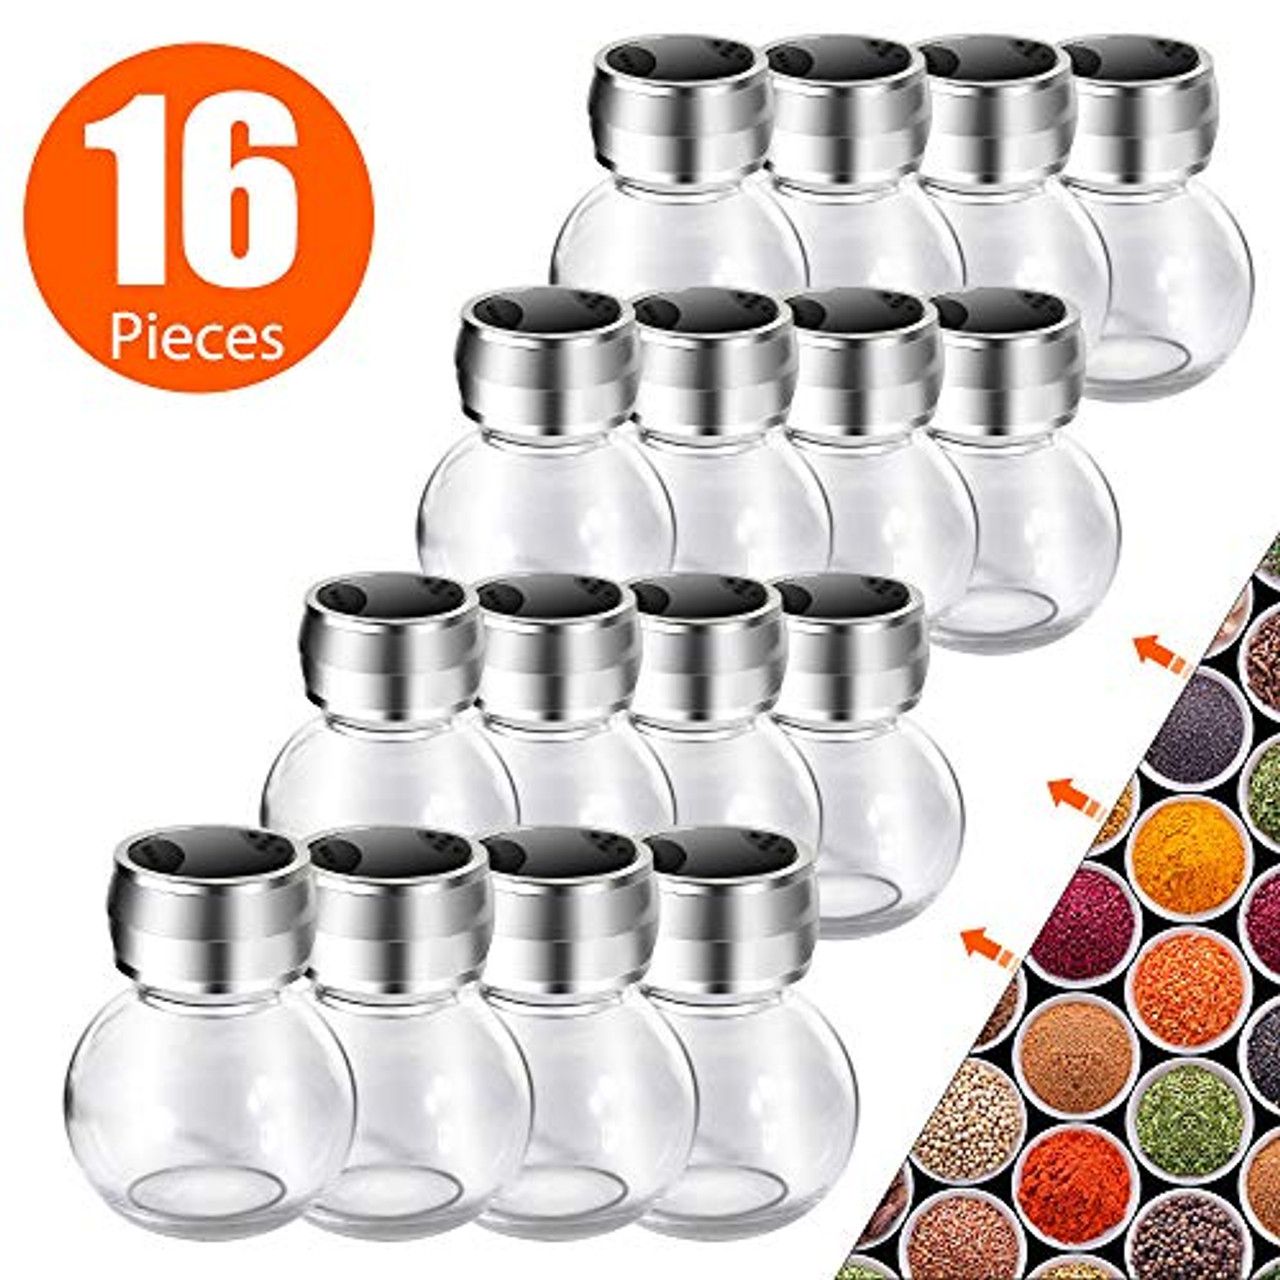 Premium Stainless Steel Glass Spice Jars Rotate Open Close Holes Round  Airtight Cap Pour Shaker Lid Spice Storage Jar Tins Container